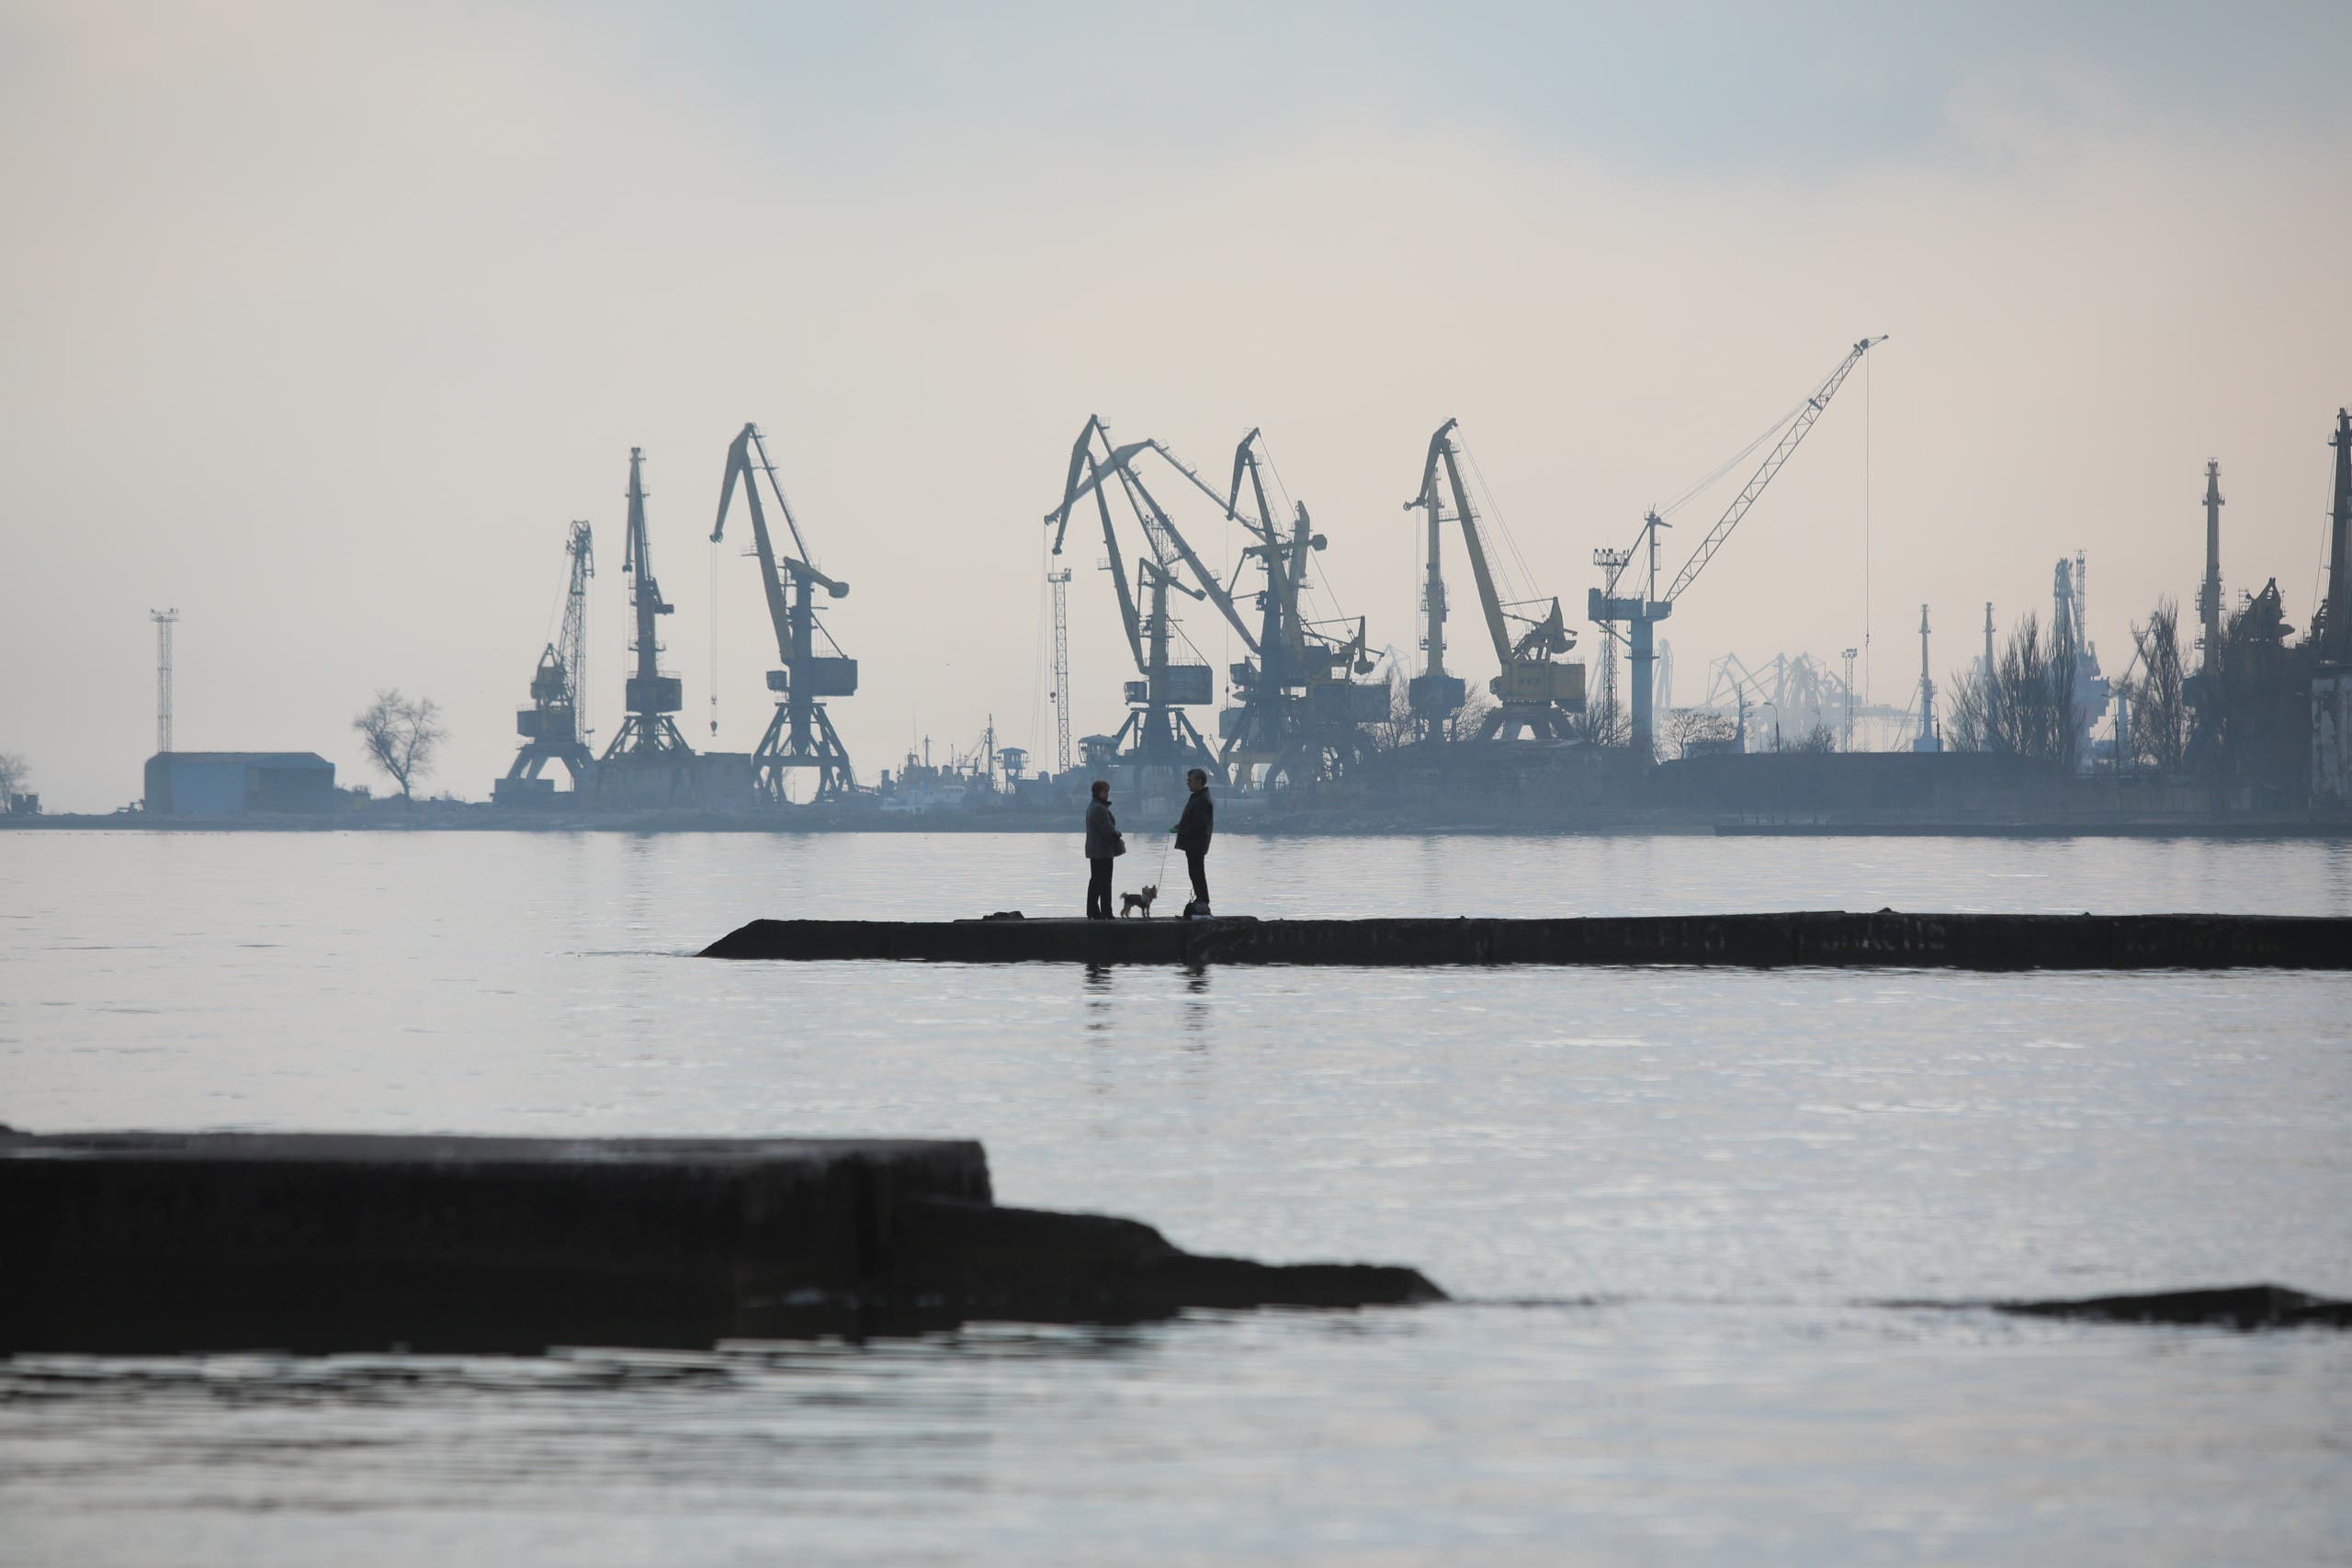 A couple walks a dog on a pier at a coast of the Sea of Azov in Ukraine's industrial port city of Mariupol on February 23, 2022. (AFP)